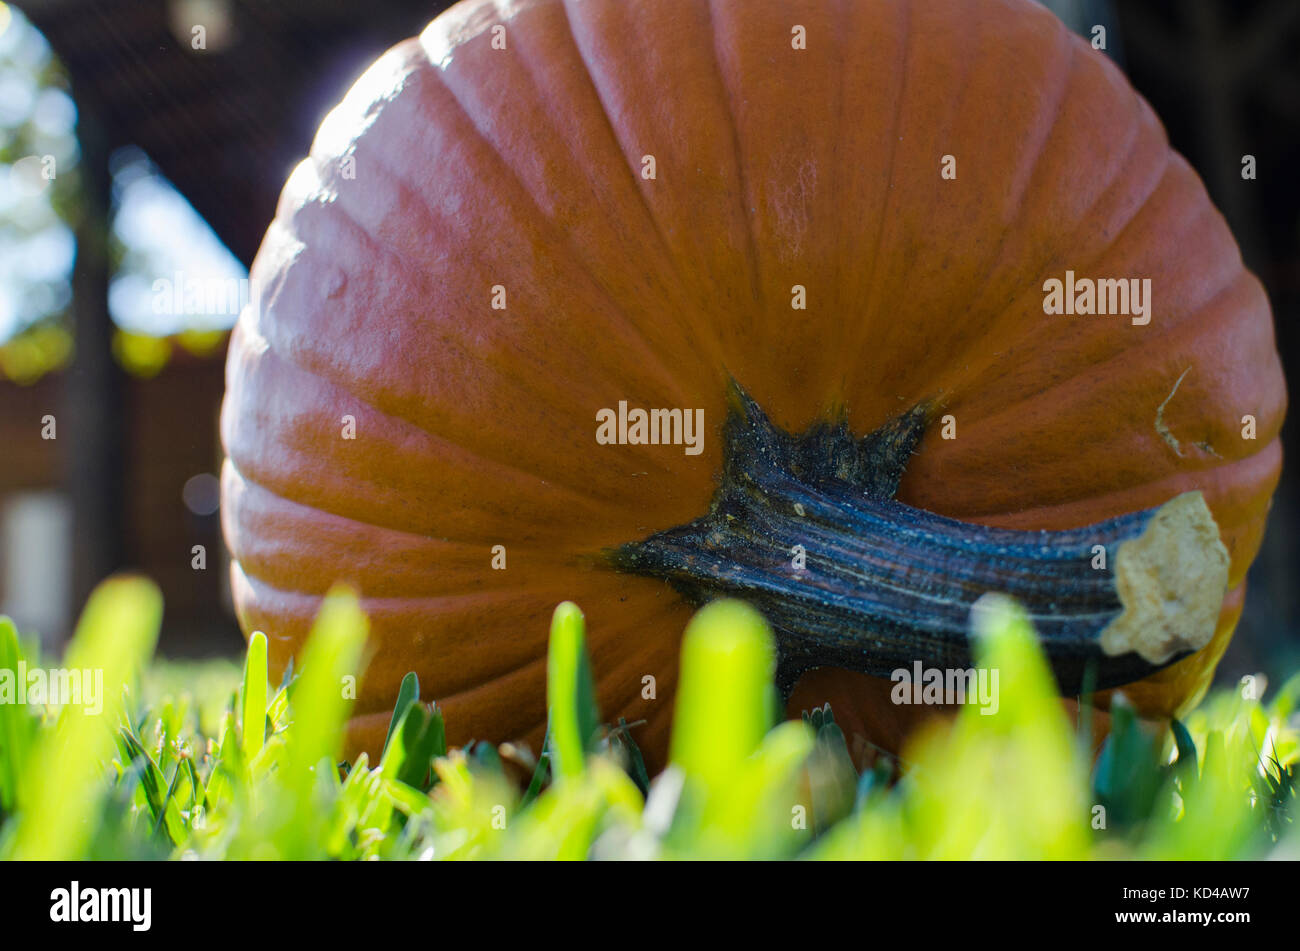 Big orange pumpkin laying on its side in the grass. Stock Photo